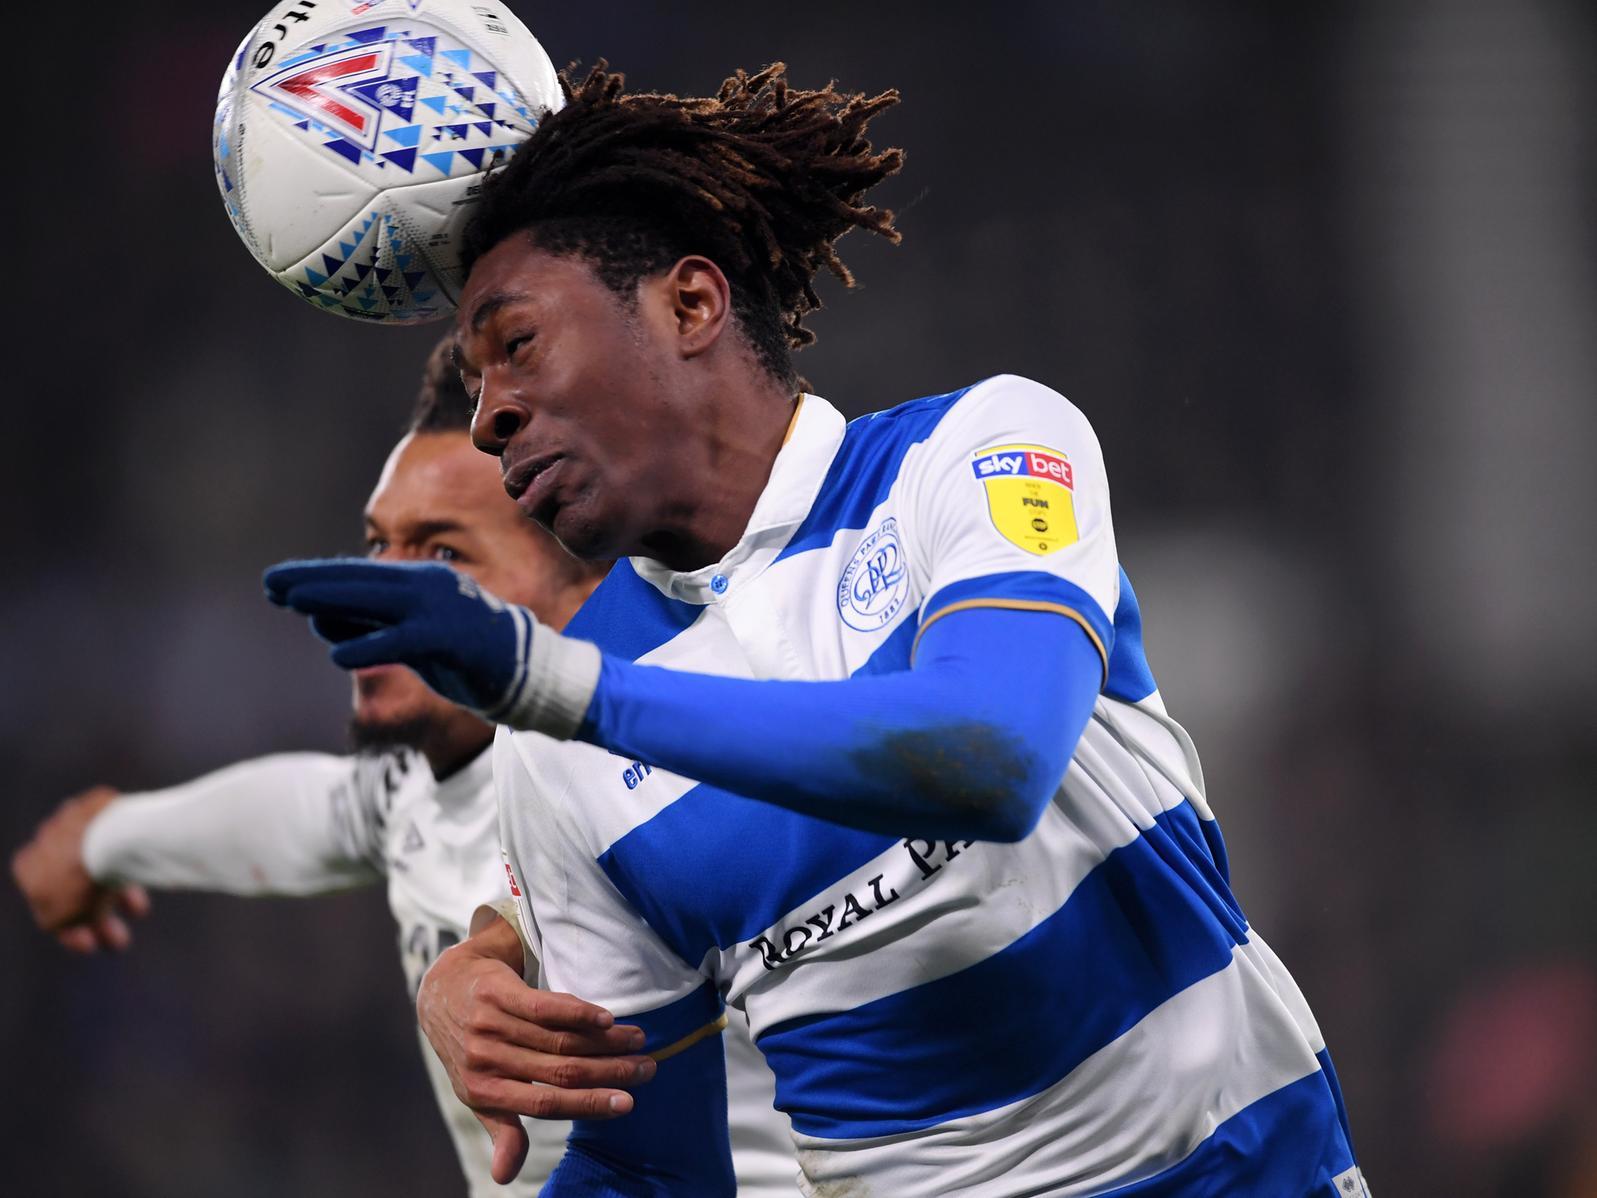 The QPR forward has been linked with a move in this window, with Sheffield United boss Chris Wilder said to be an admirer. He wont be cheap, though.